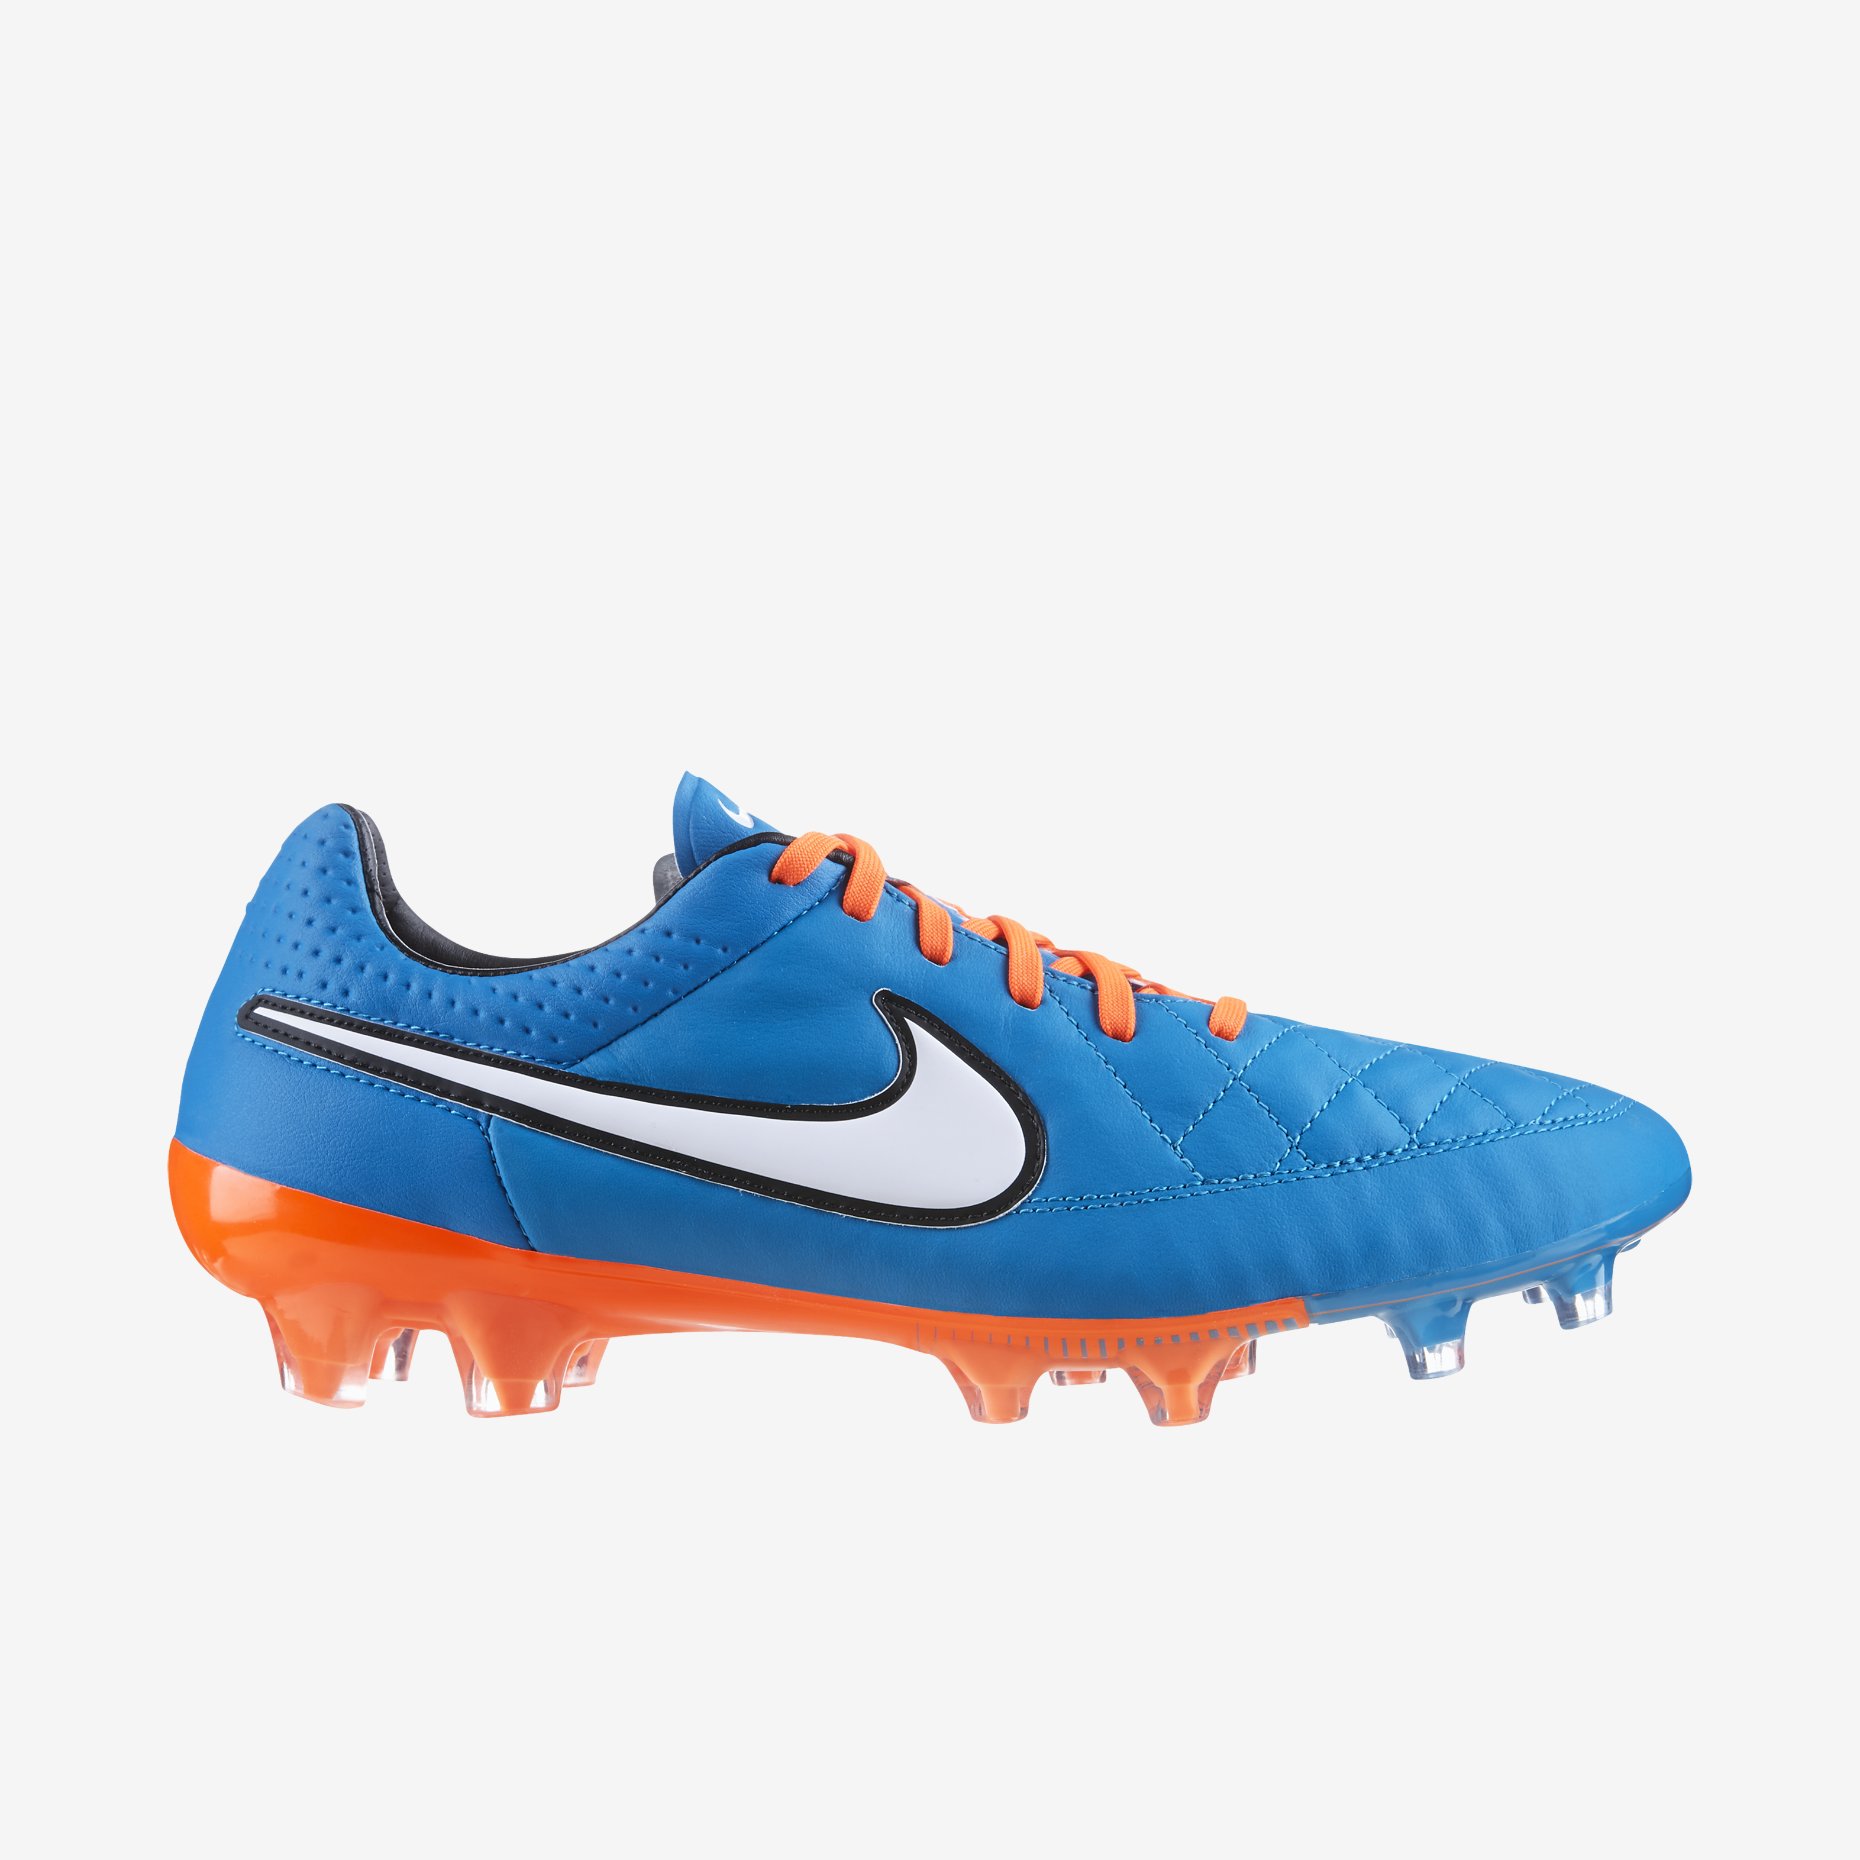 Nike-Tiempo-Legend-V-Mens-Firm-Ground-Soccer-Cleat-631518_418_A.jpg (1860×1860)